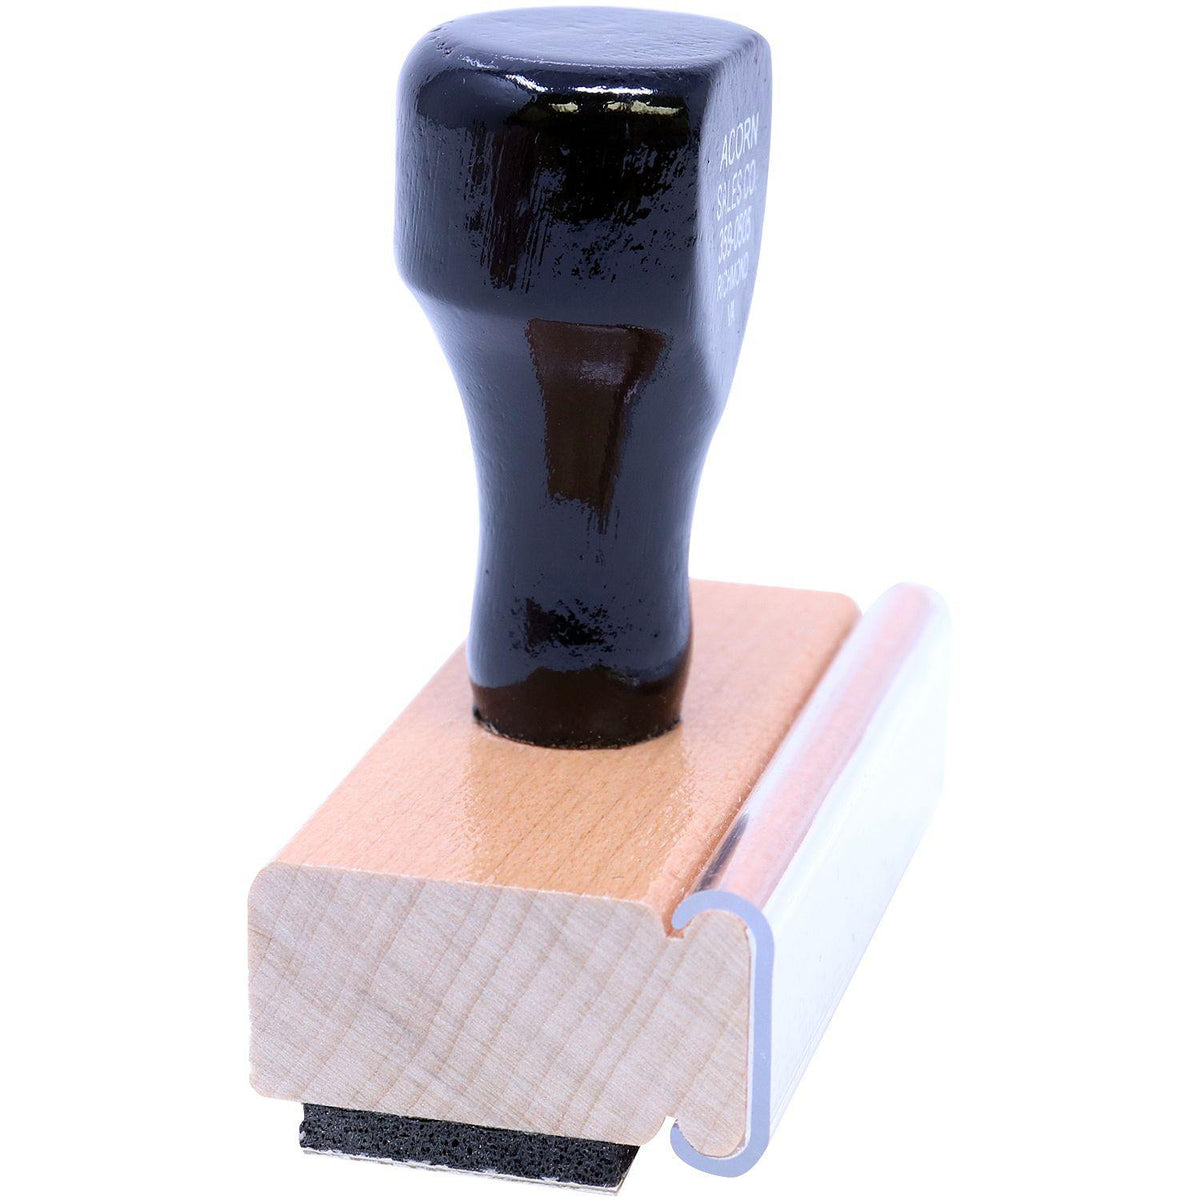 Side View of Client&#39;s Copy Rubber Stamp at an Angle